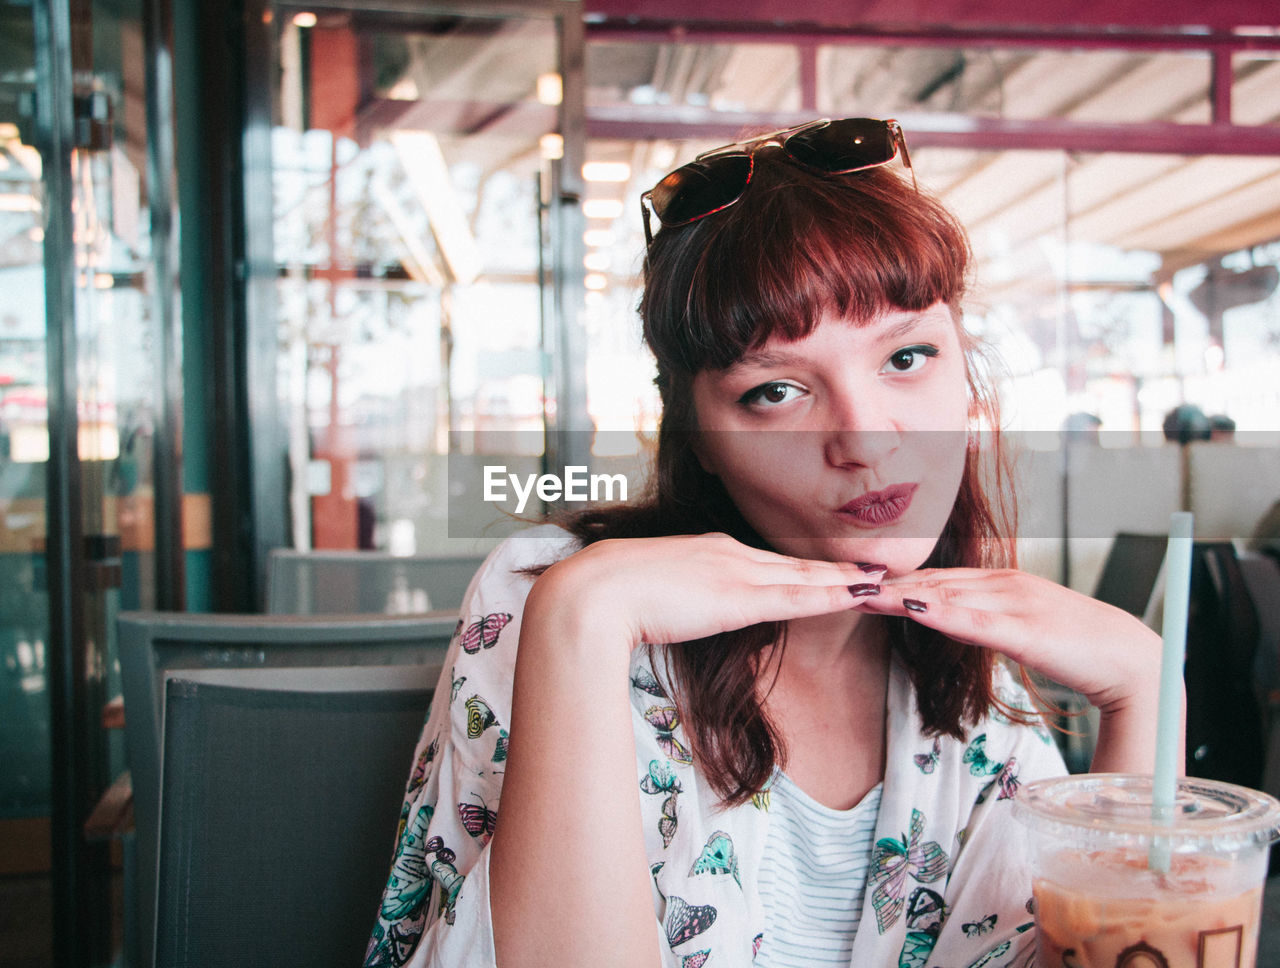 Portrait of beautiful young woman puckering at restaurant